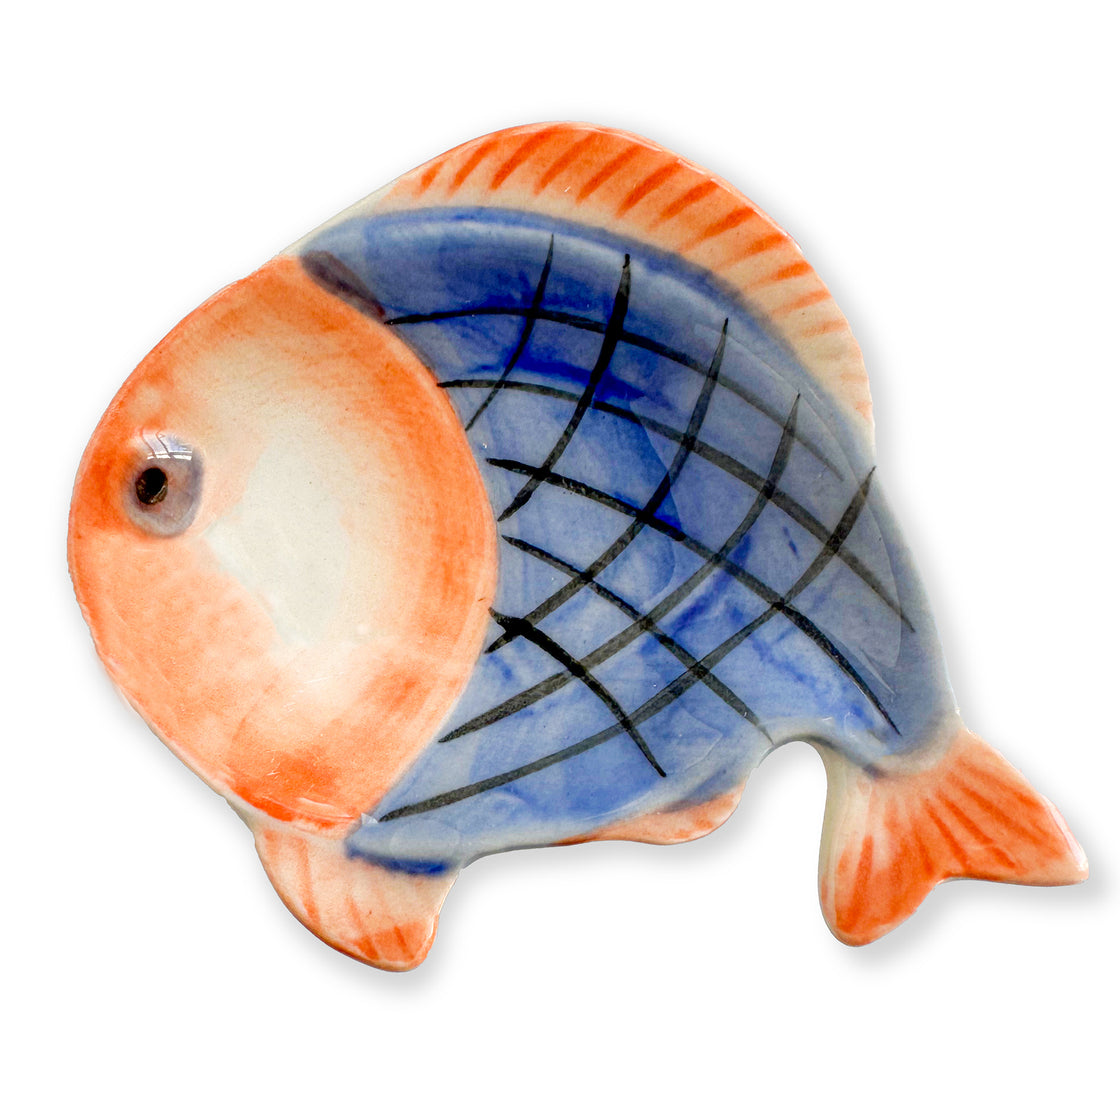  Mini Fish Plates in shades of orange and blue by rengora